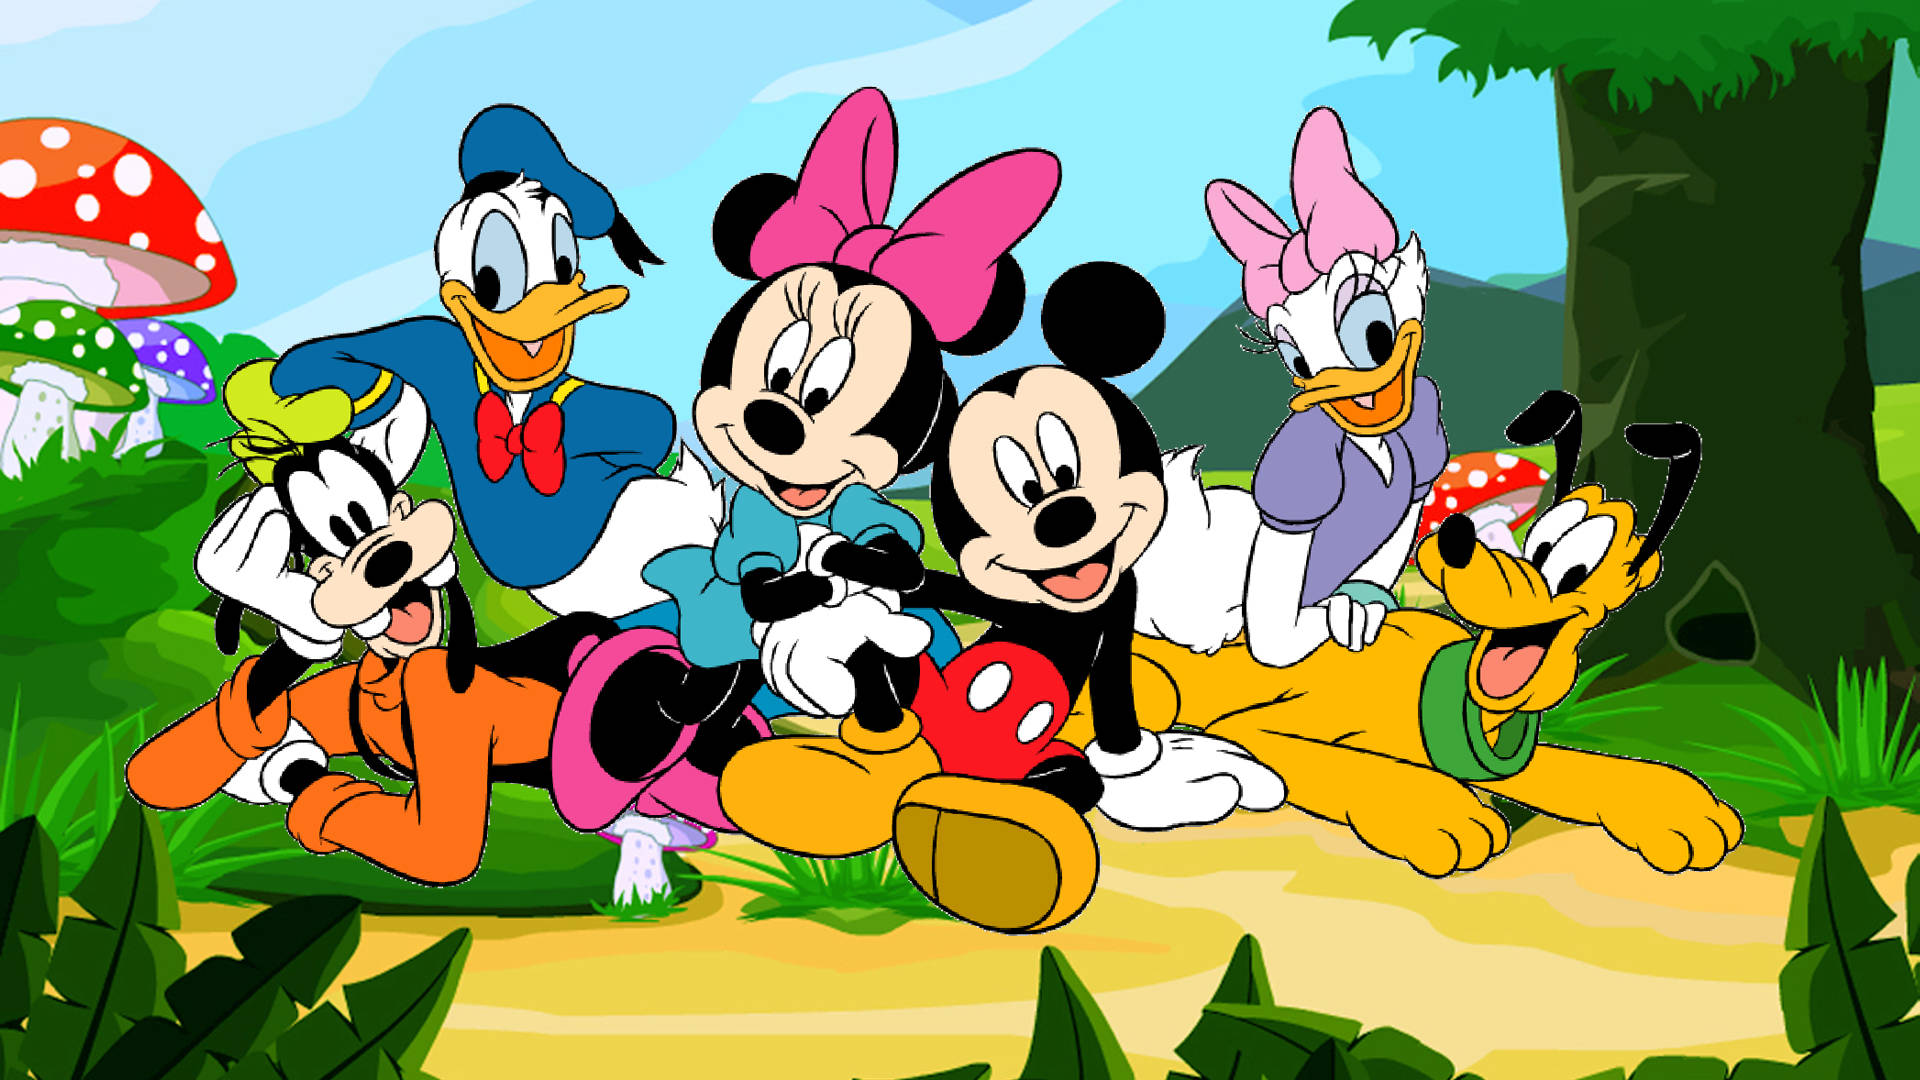 Disney 1920x1080 Hd Mickey Mouse Cast In Forest Background